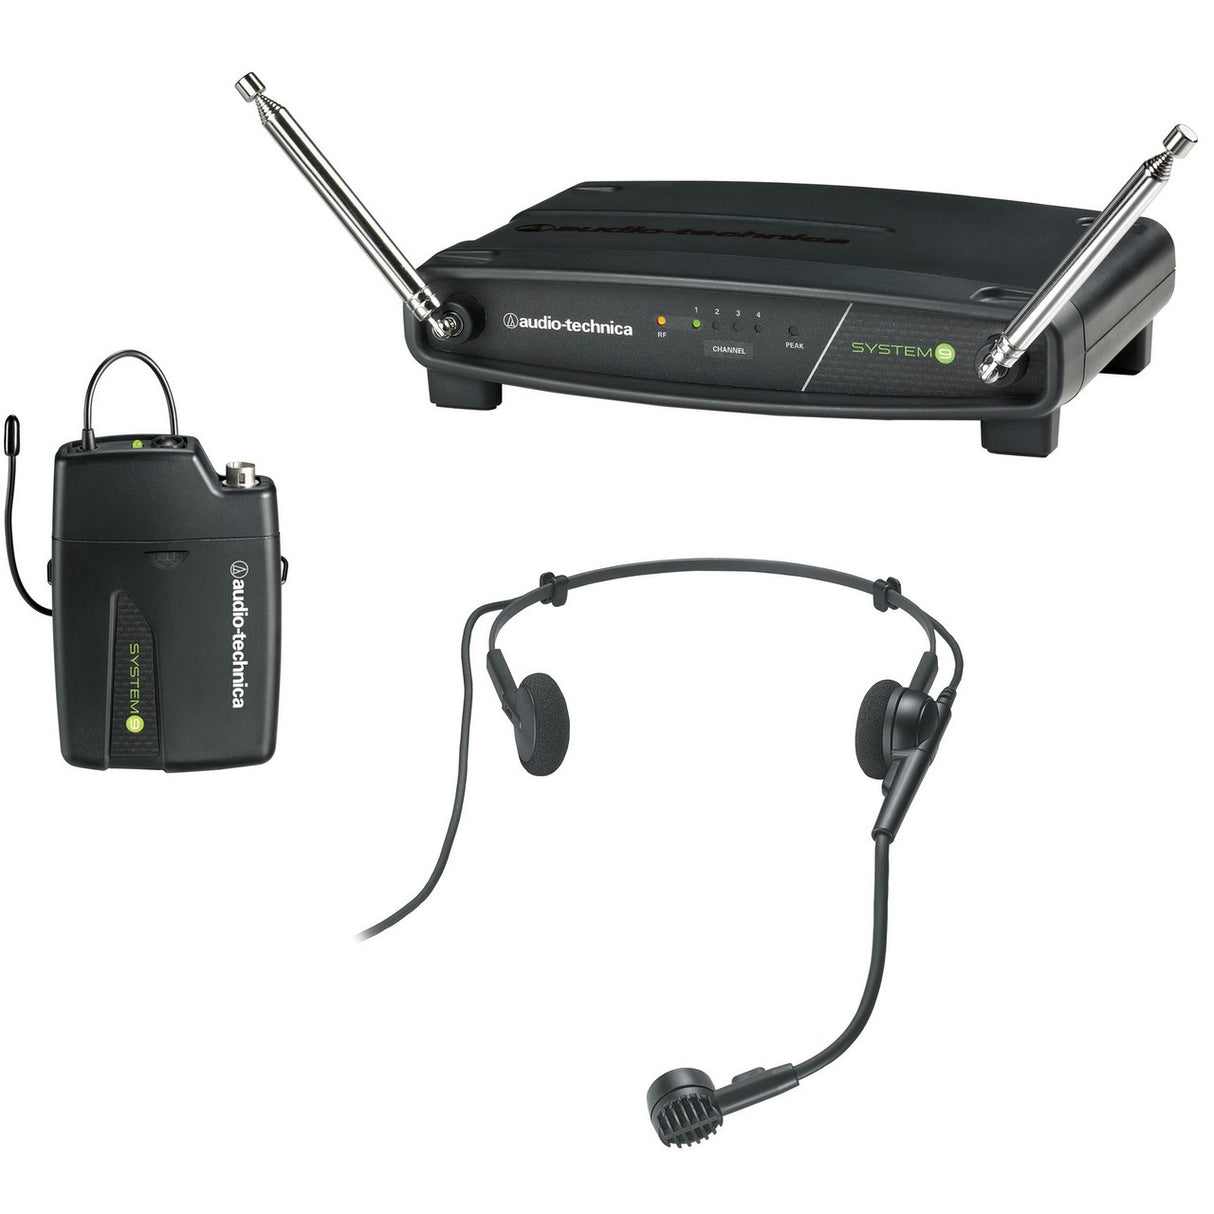 Audio Technica ATW-901a/H | System 9 VHF Wireless System with Headworn Microphone